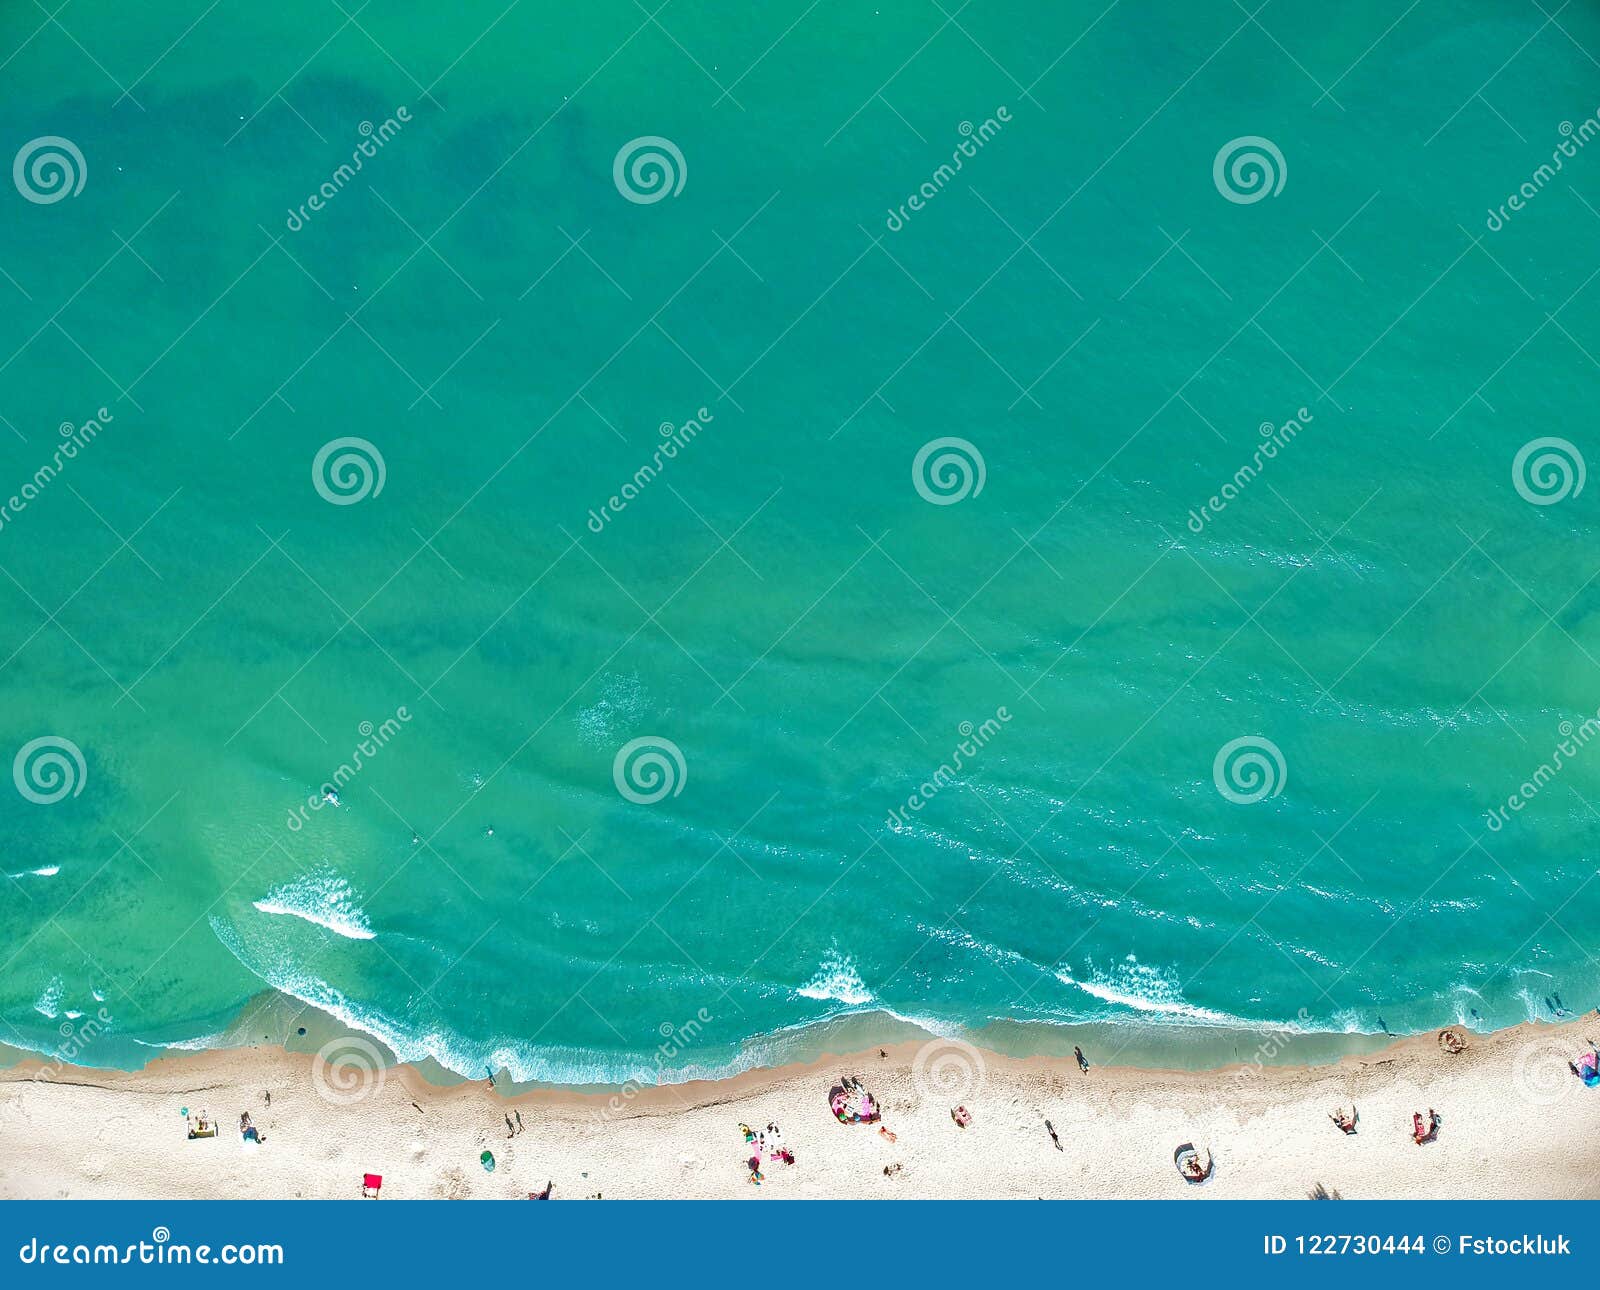 aerial view on a clean sand beach and blue ocean with sunbathers